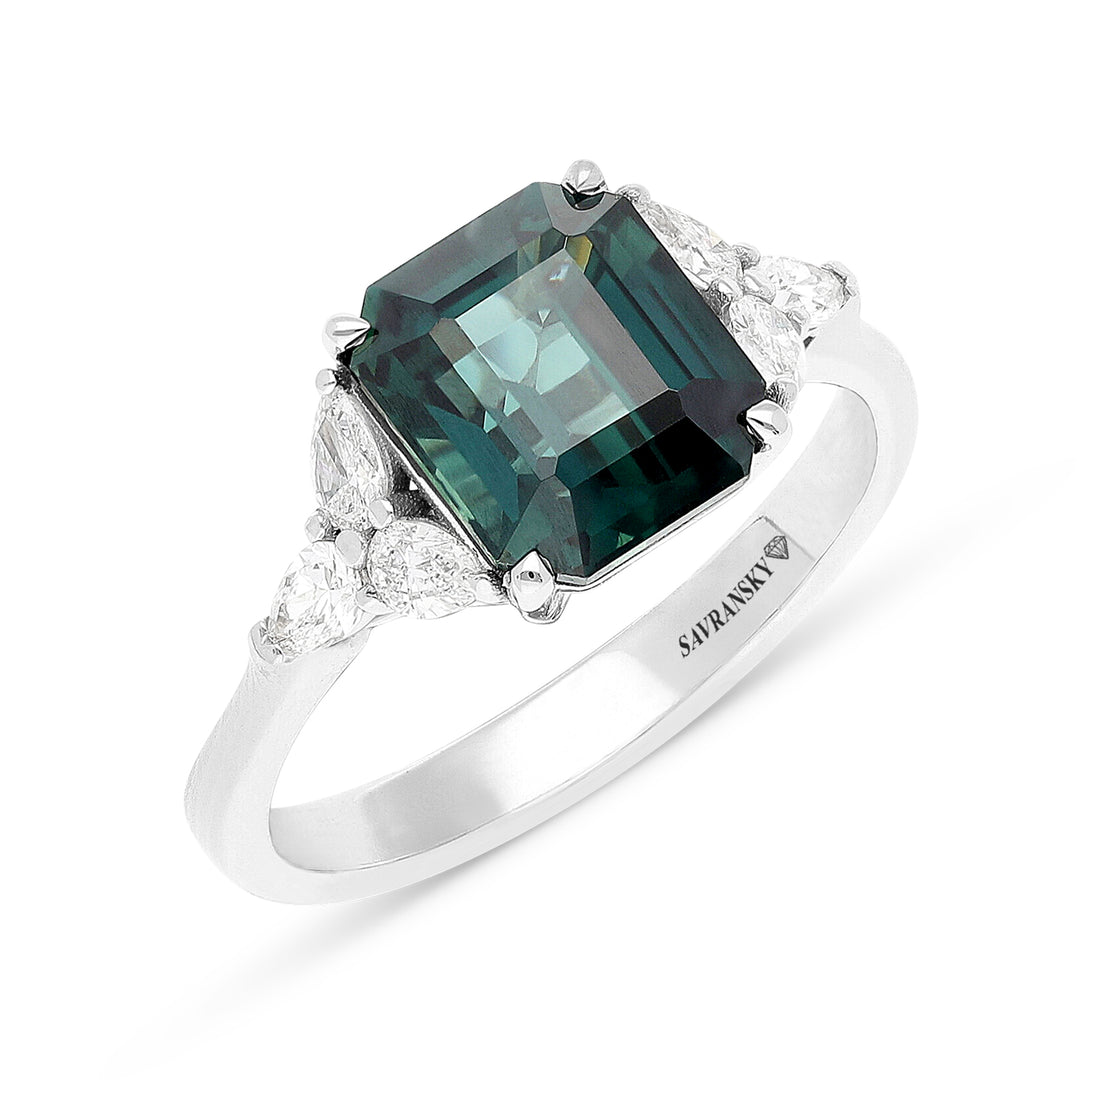 3.92 carat Emerald cut Green Sapphire ring with 6 Pear Shape diamond side stones  in a total of 0.46 carats